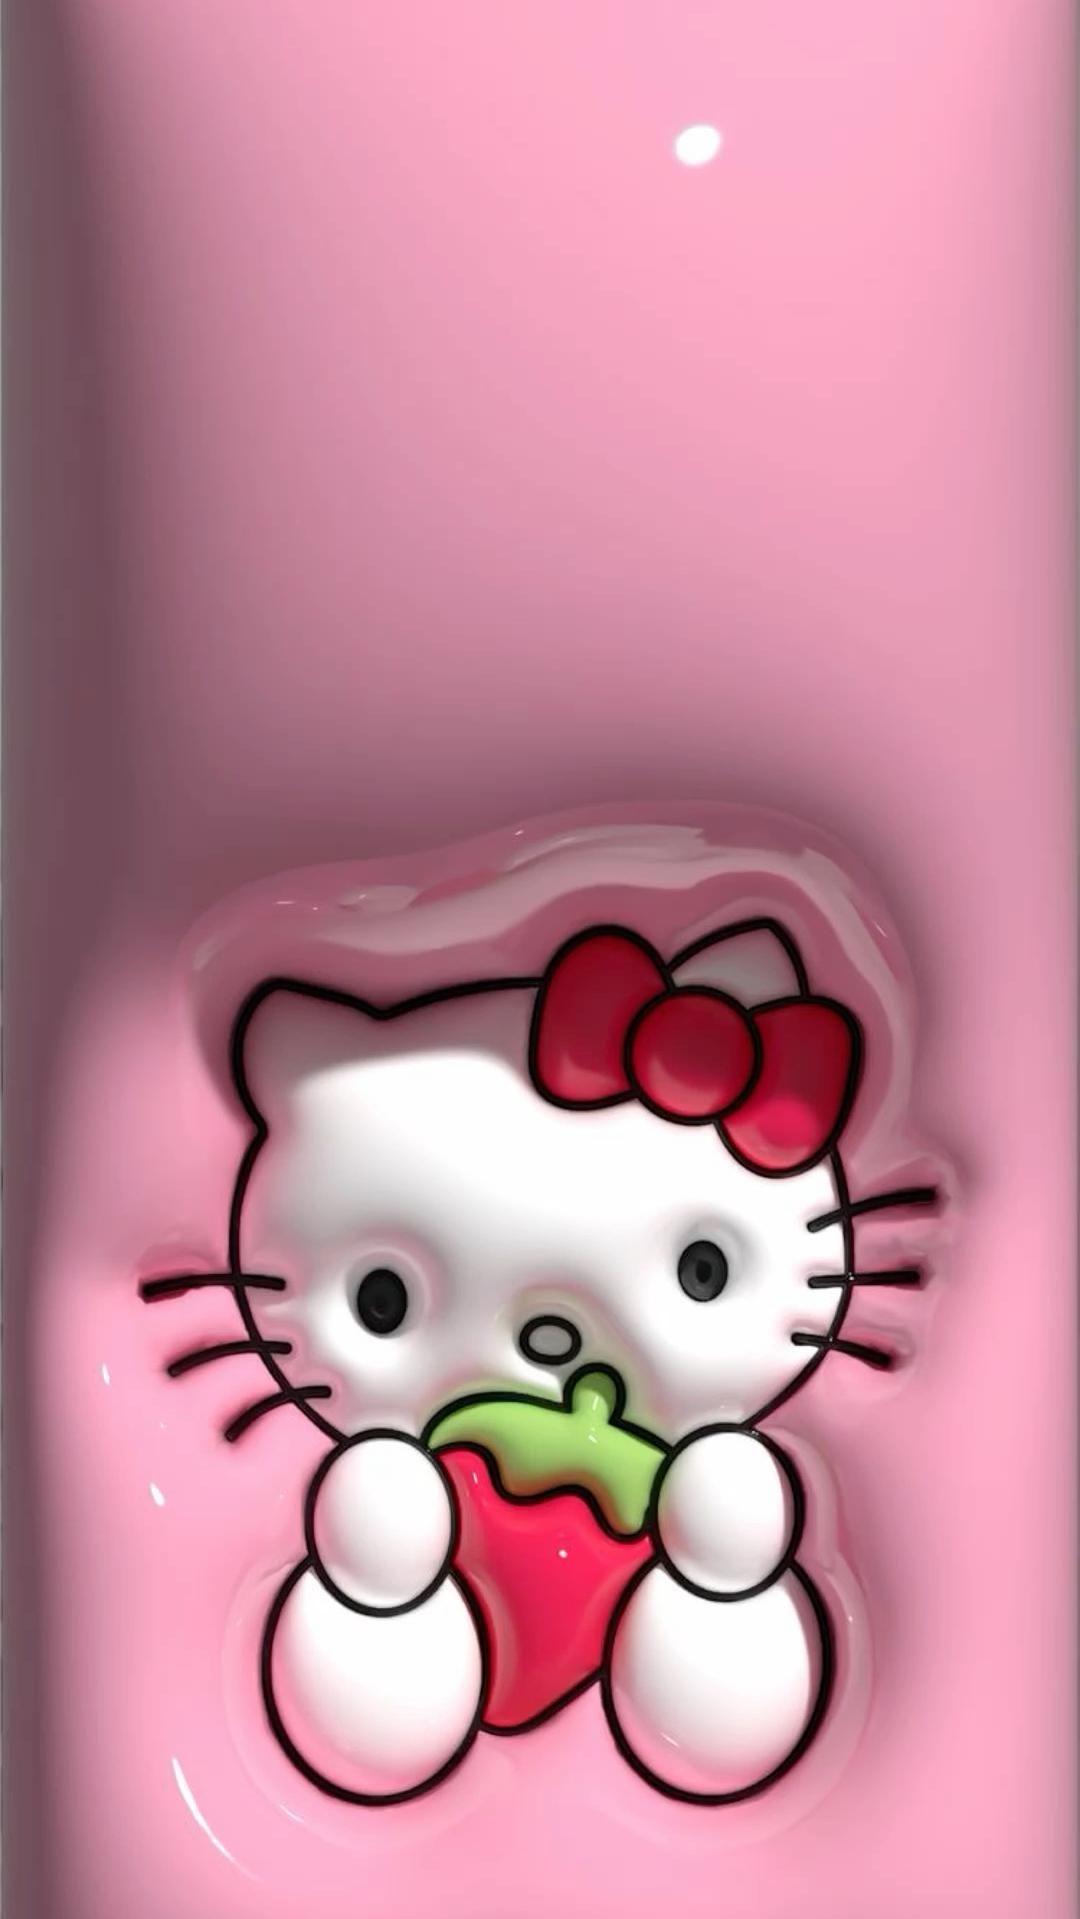 🔥 Download 3d Hello Kitty Wallpaper For iPhone In by @michaelg40  Hello  Kitty Phone Wallpapers, Hello Kitty Backgrounds, Background Hello Kitty, Hello  Kitty Background